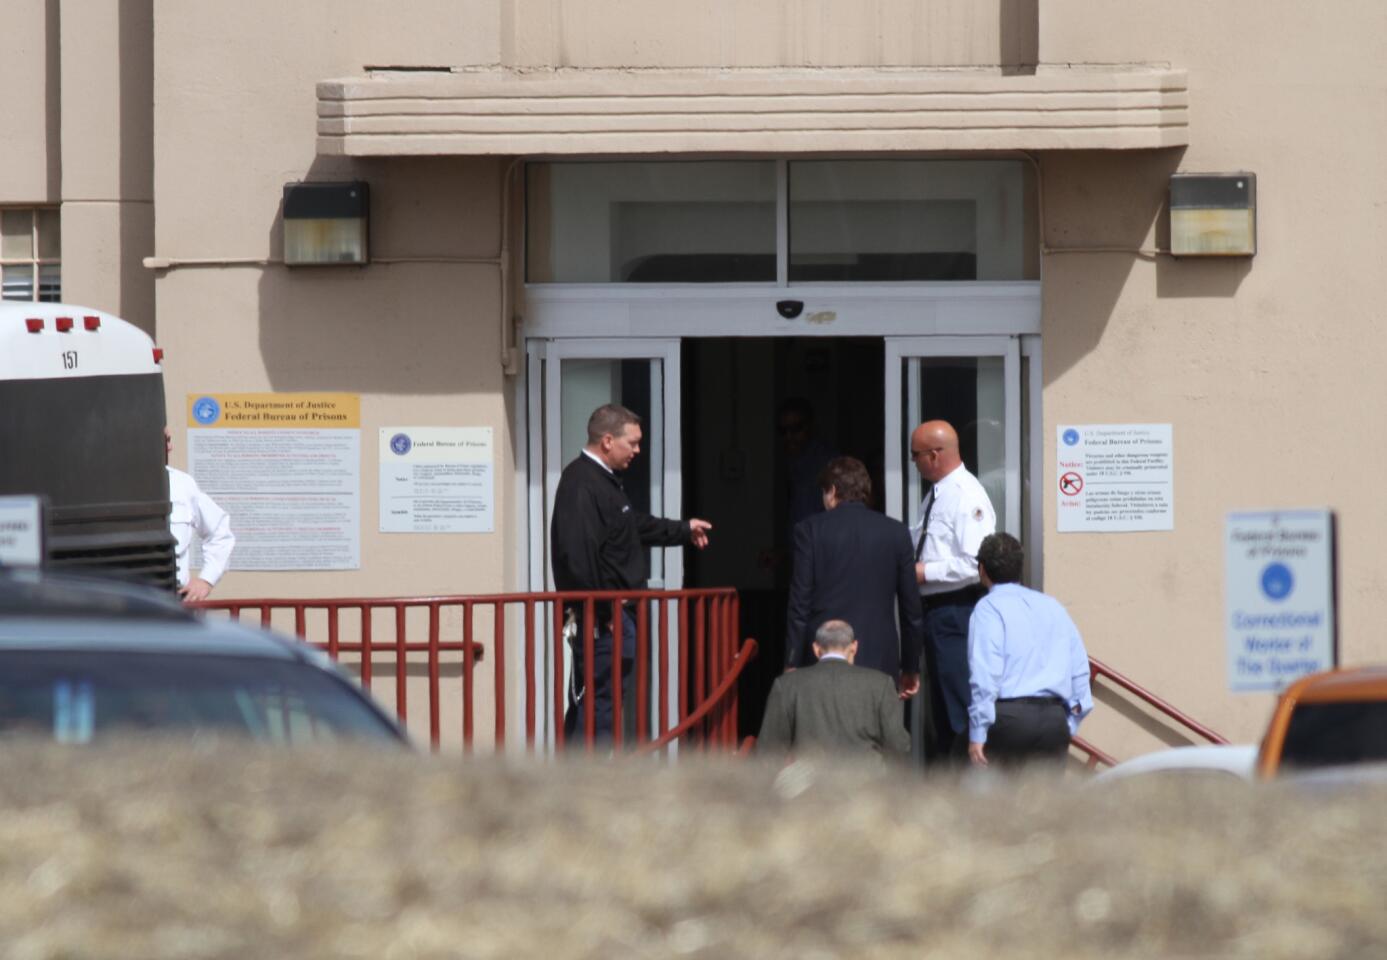 Former Gov. Rod Blagojevich arrives at Federal Correctional Institution Englewood with his lawyers Aaron Goldstein, right, and Sheldon Sorosky to begin serving his 14-year sentence on federal corruption charges.